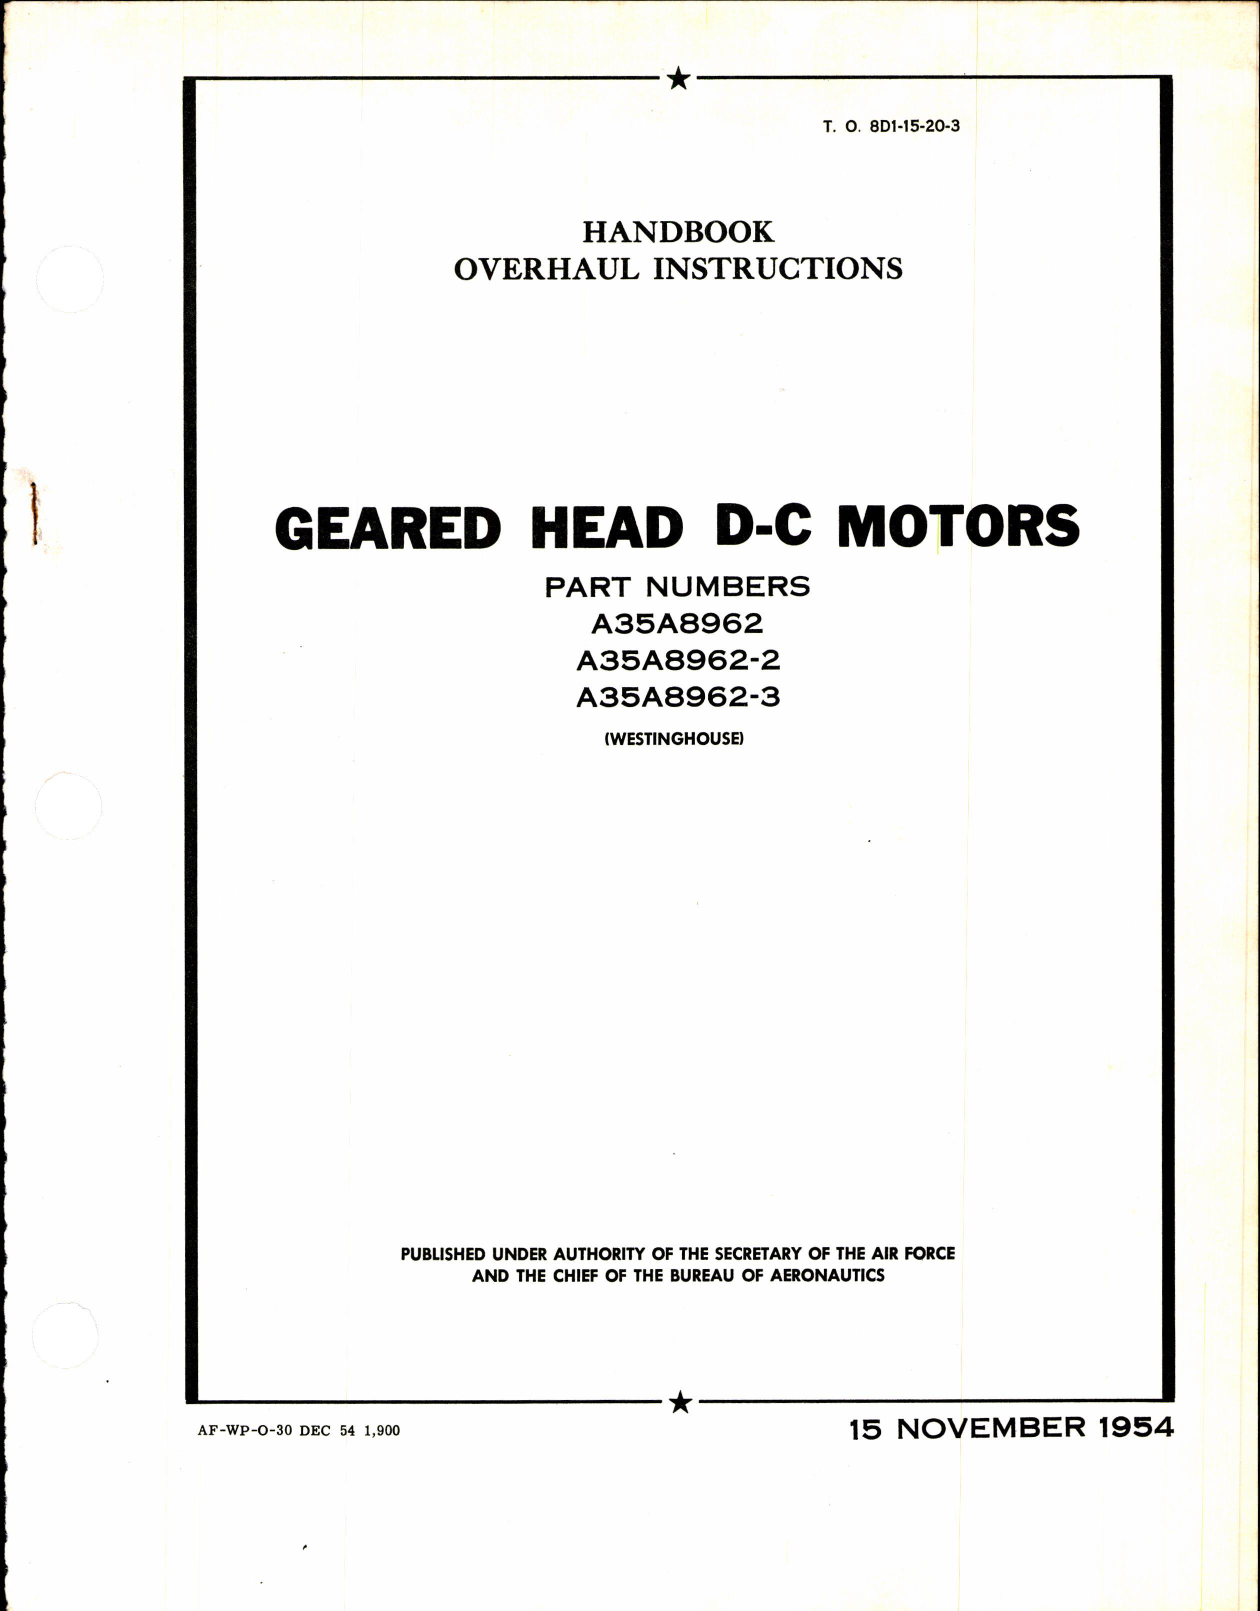 Sample page 1 from AirCorps Library document: Overhaul Instructions for Geared Head D-C Motors